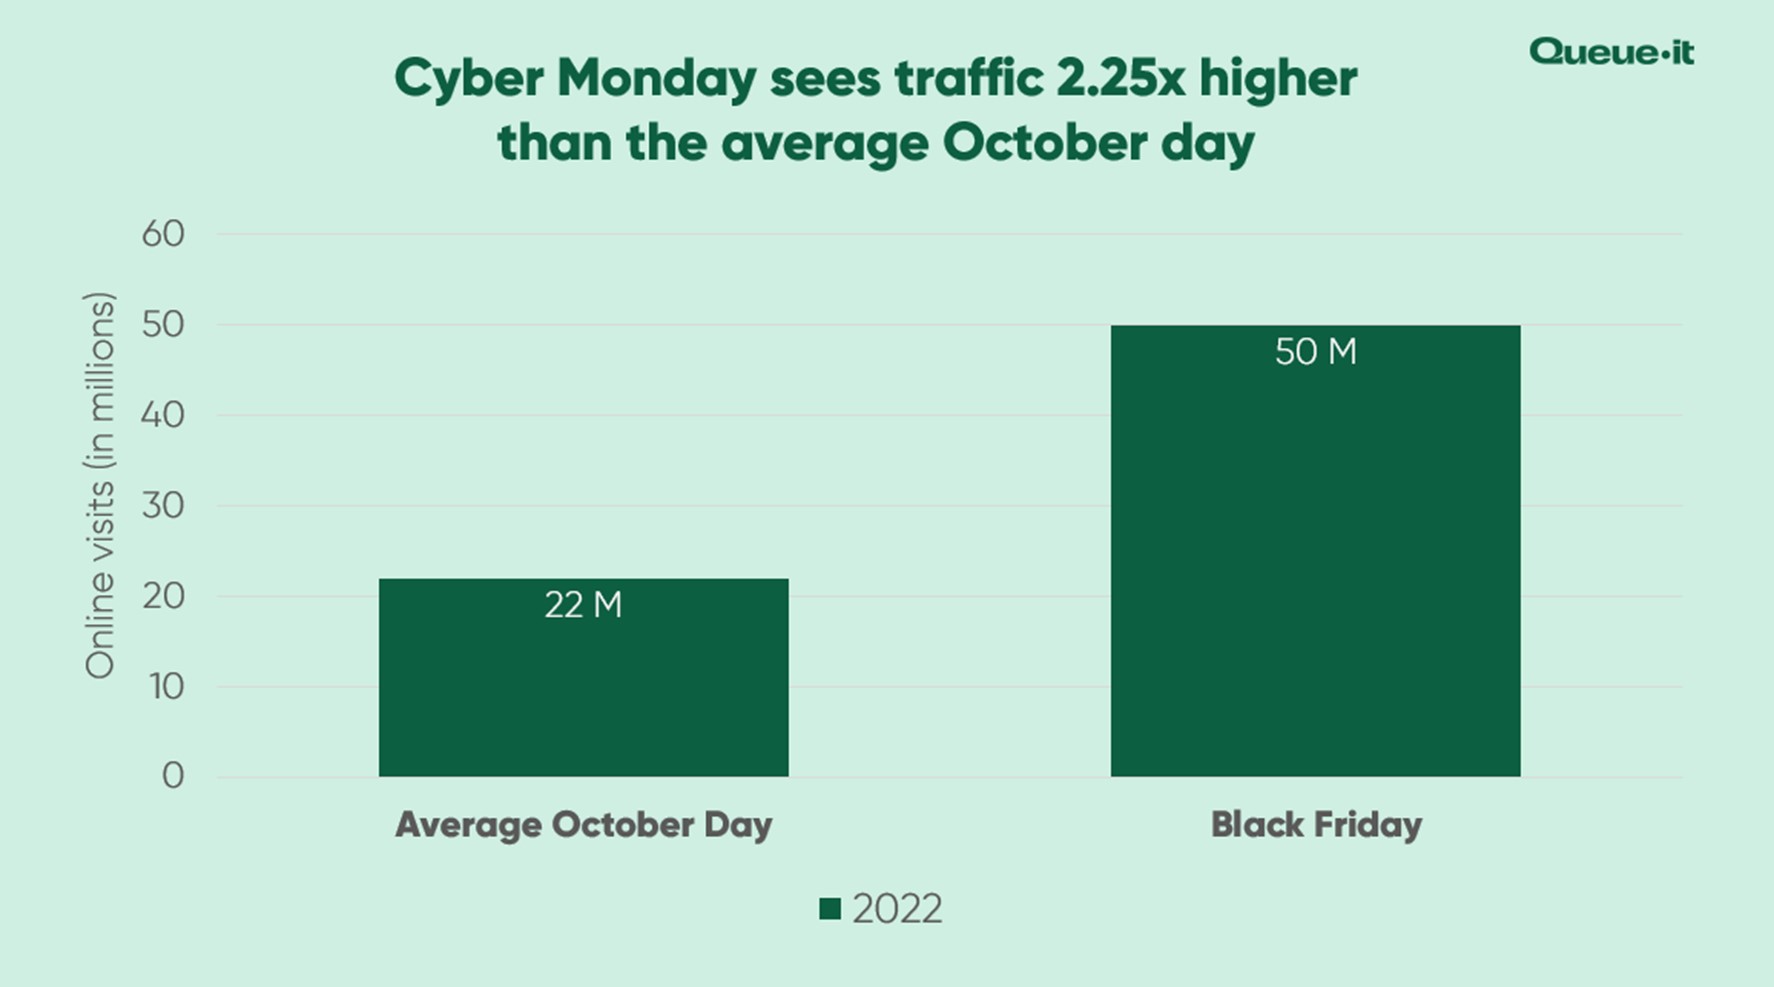 Cyber Monday sees traffic 2.5x that of normal October day